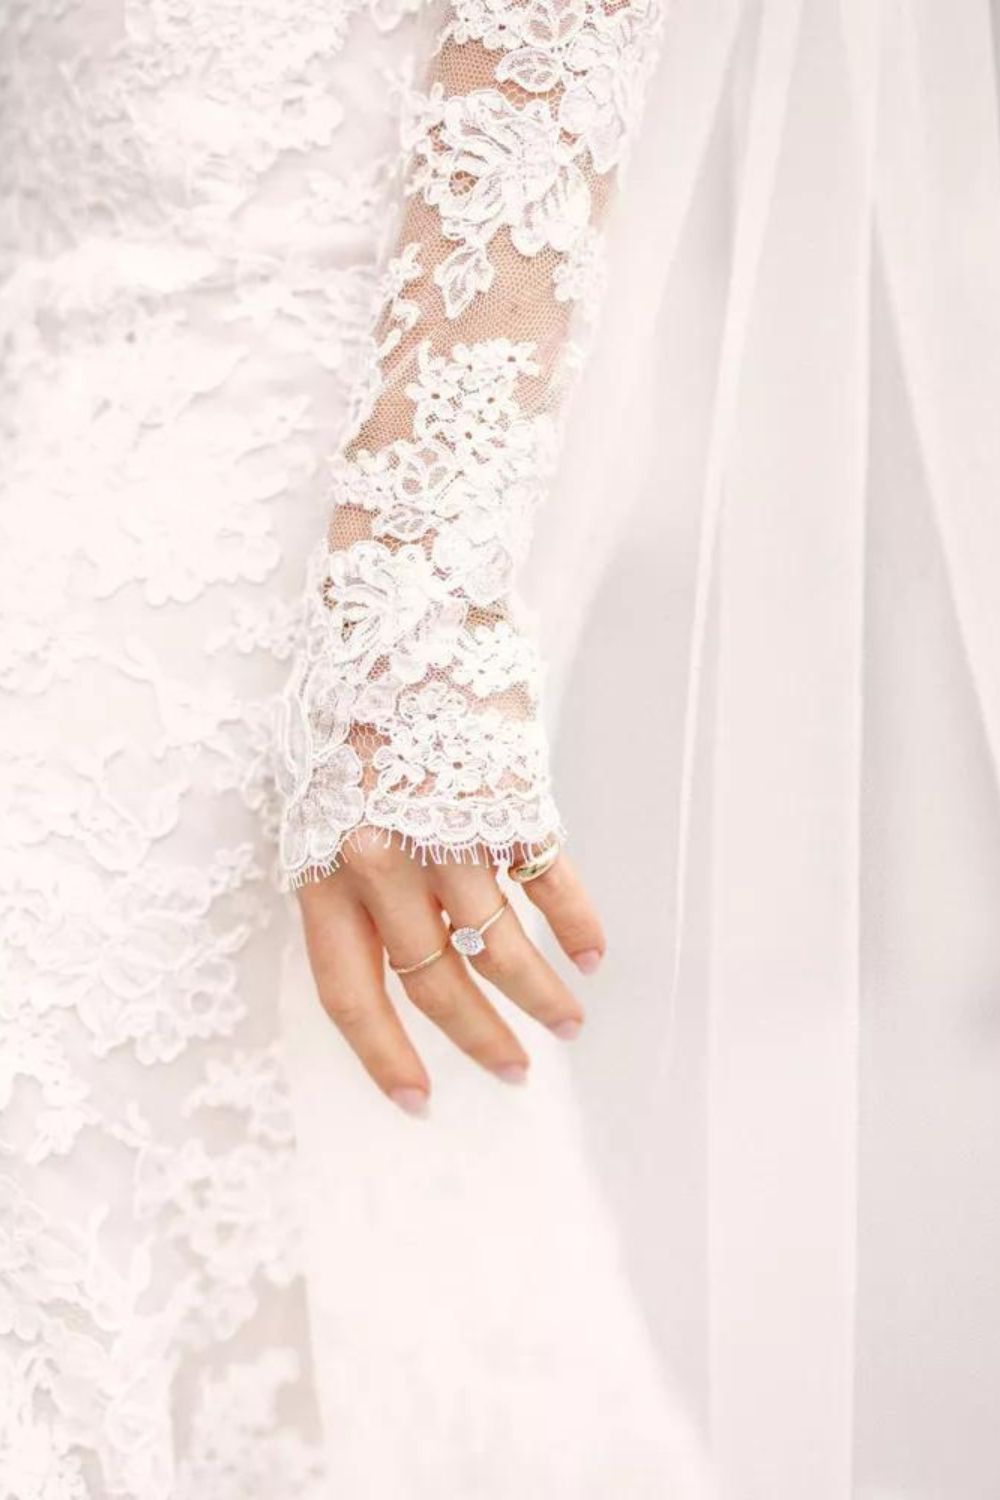 Should You Wear Your Engagement Ring Down the Aisle?